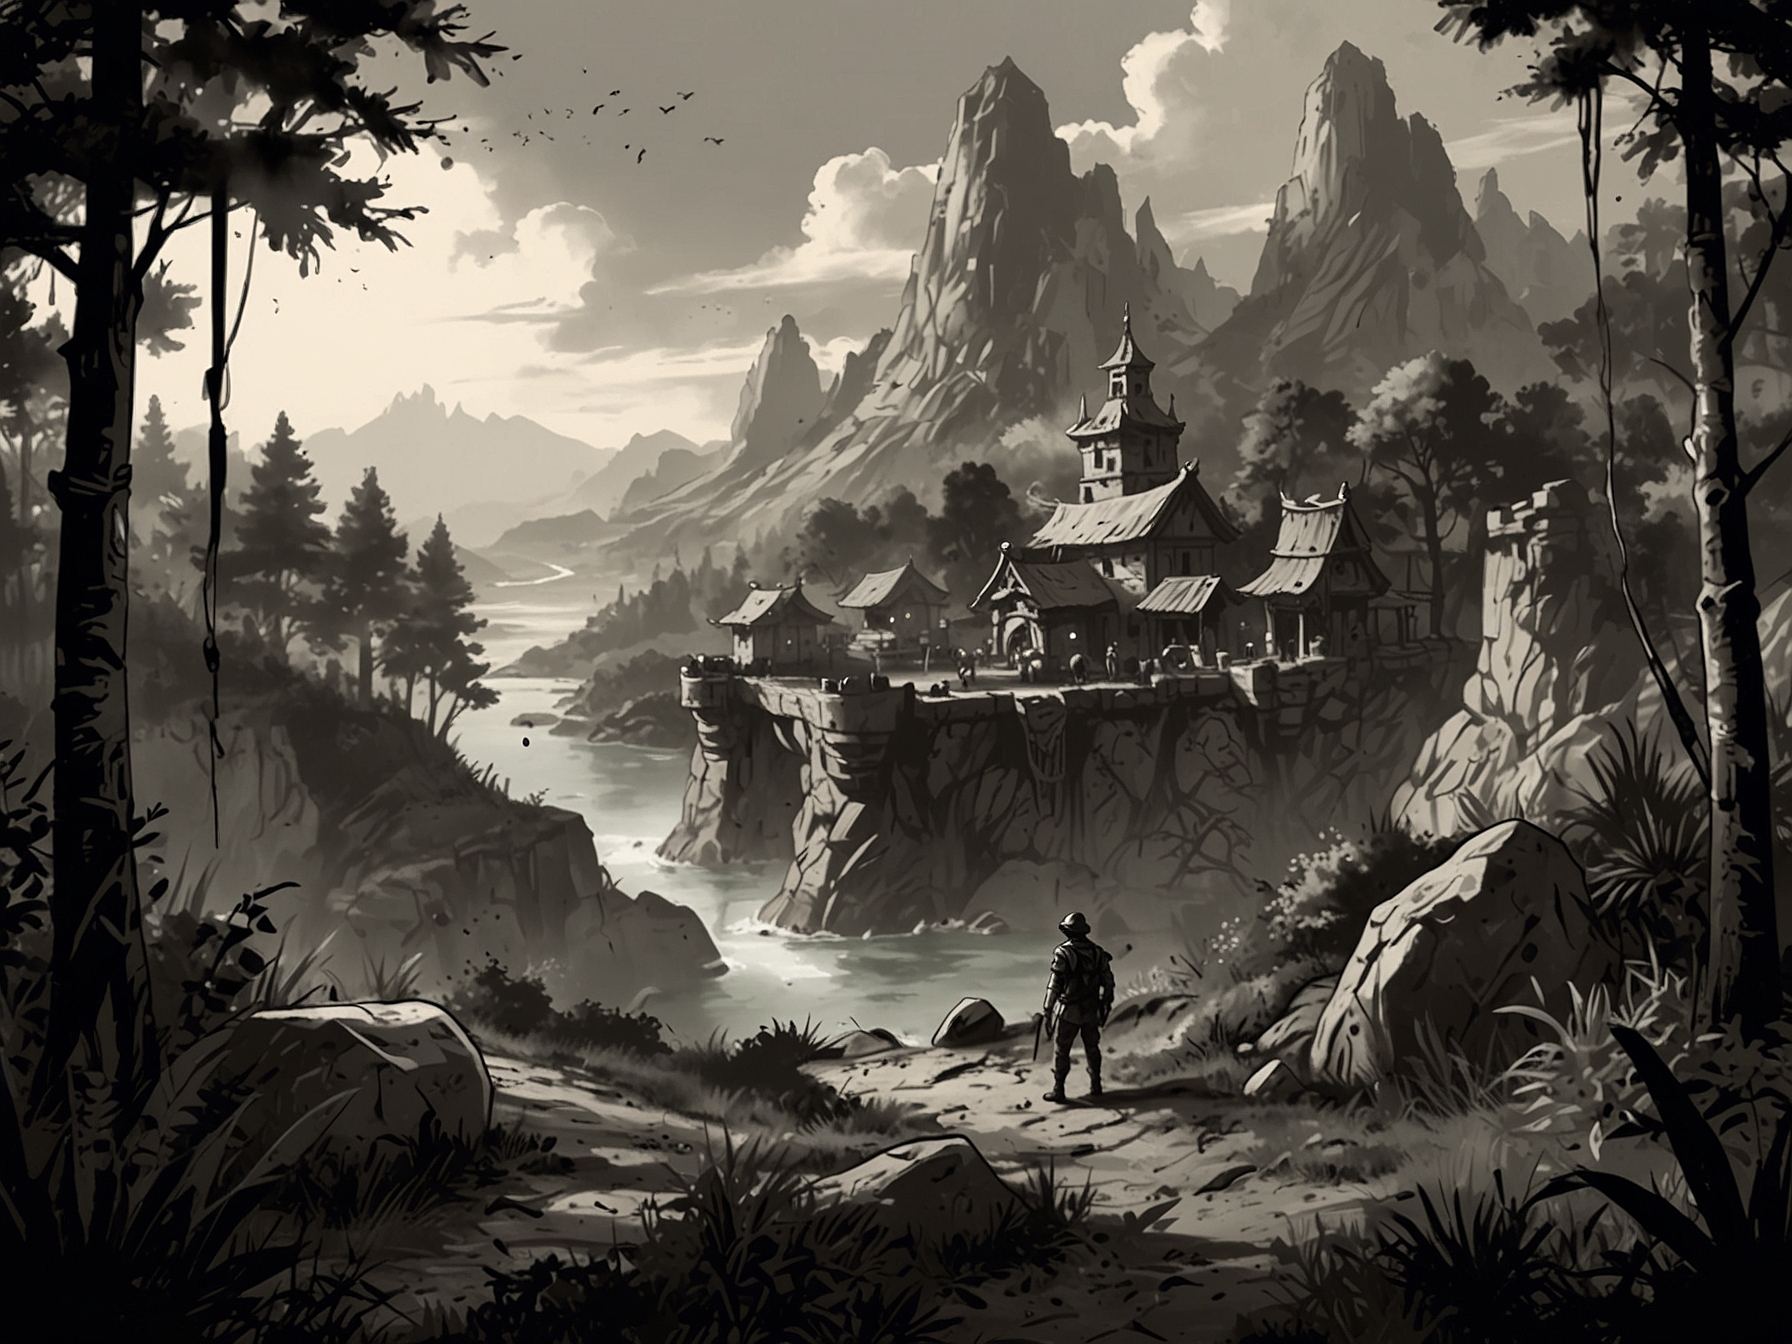 An in-game scene of The Lands Between filled with diverse landscapes and hidden treasures, emphasizing thorough exploration, interaction with NPCs, and uncovering secrets.